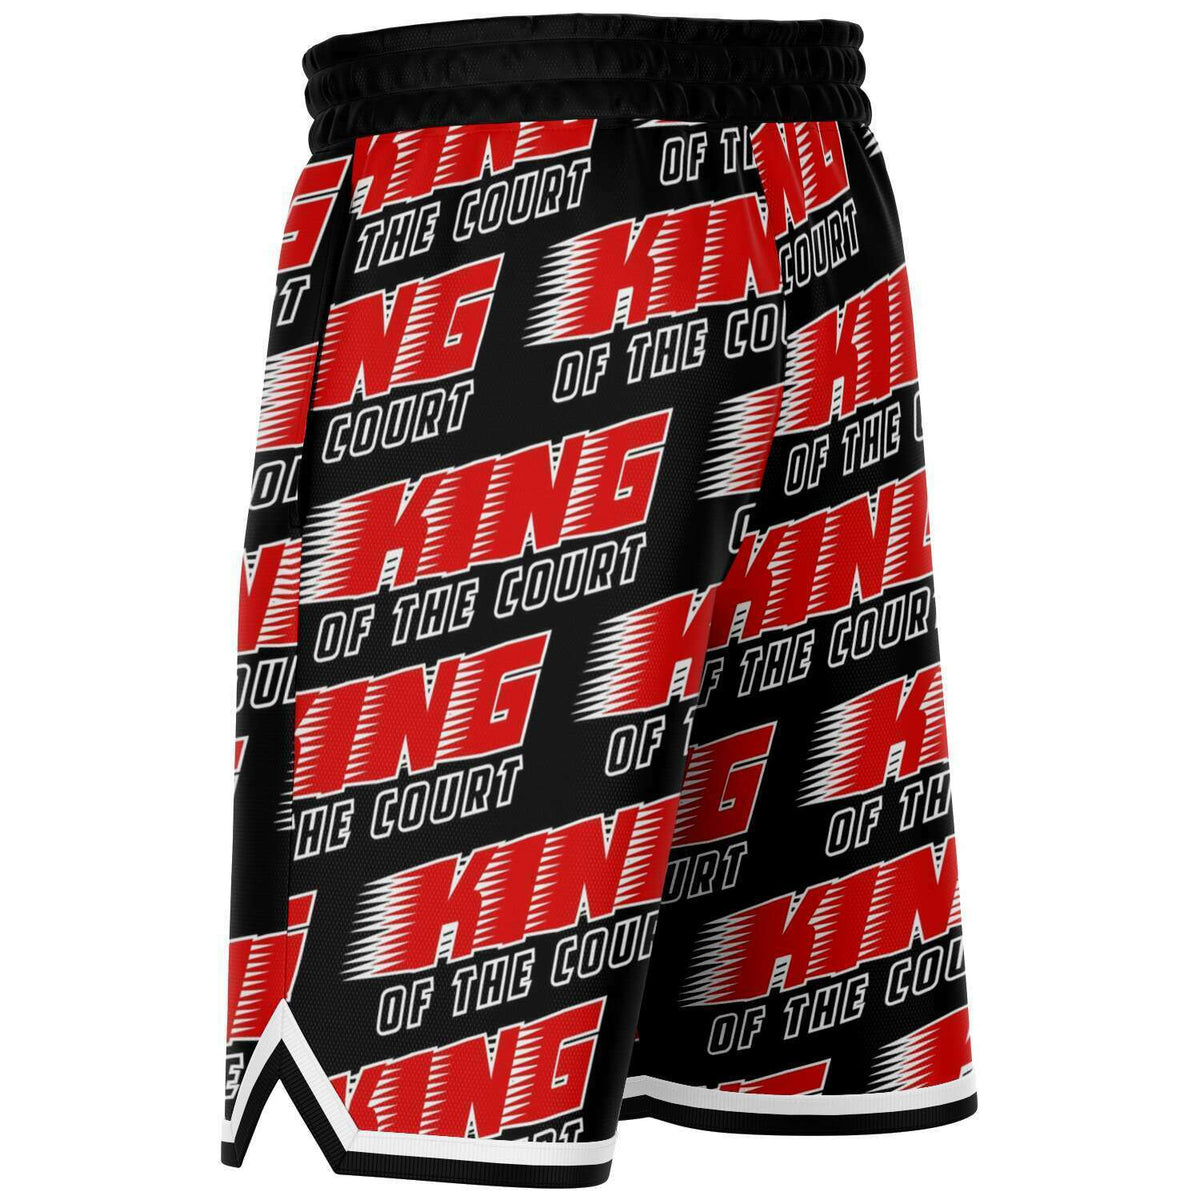 Hoop League King of the Court Game Shorts - Hoop League 